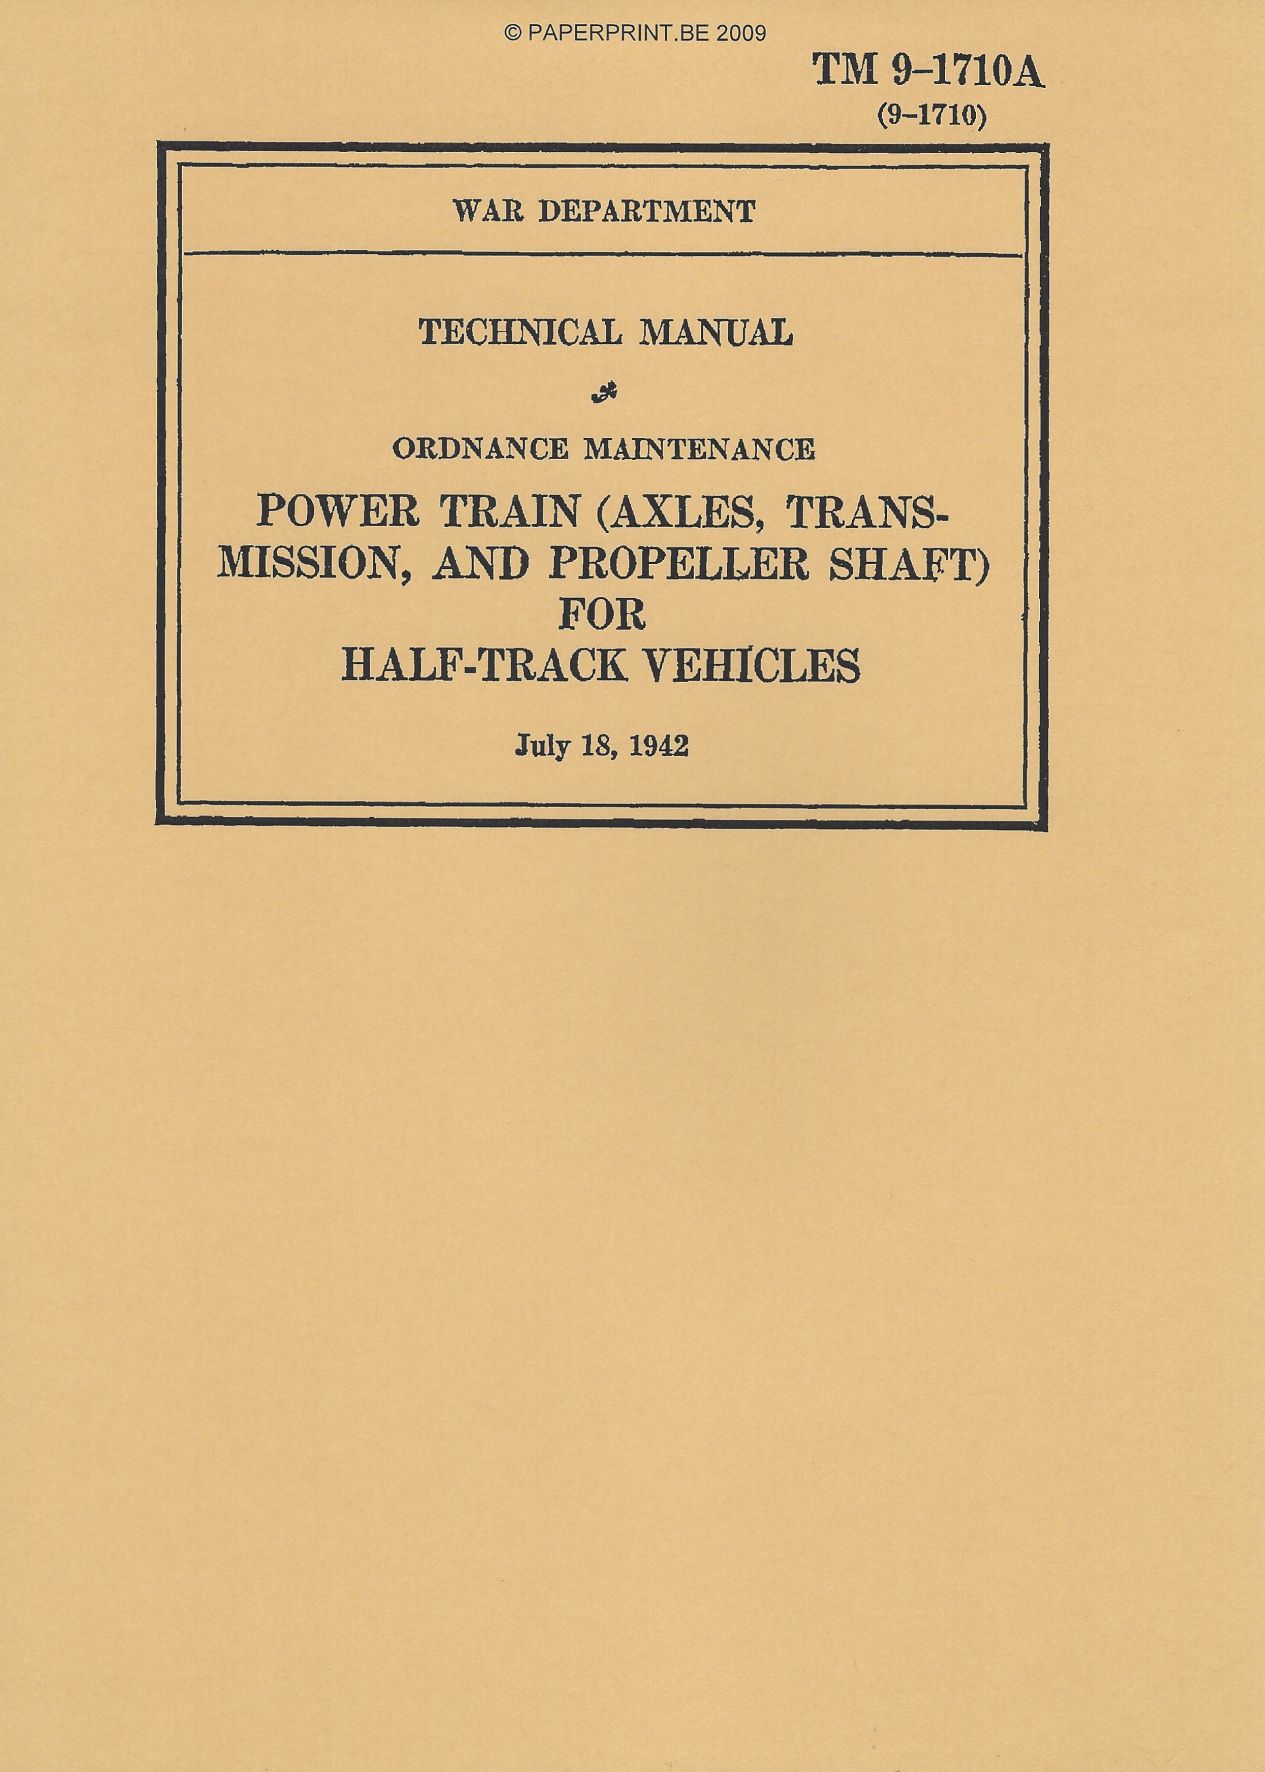 TM 9-1710A US POWER TRAIN (AXLES, TRANSMISSION, AND PROPELLER SHAFT) FOR  HALF-TRACK VEHICLES